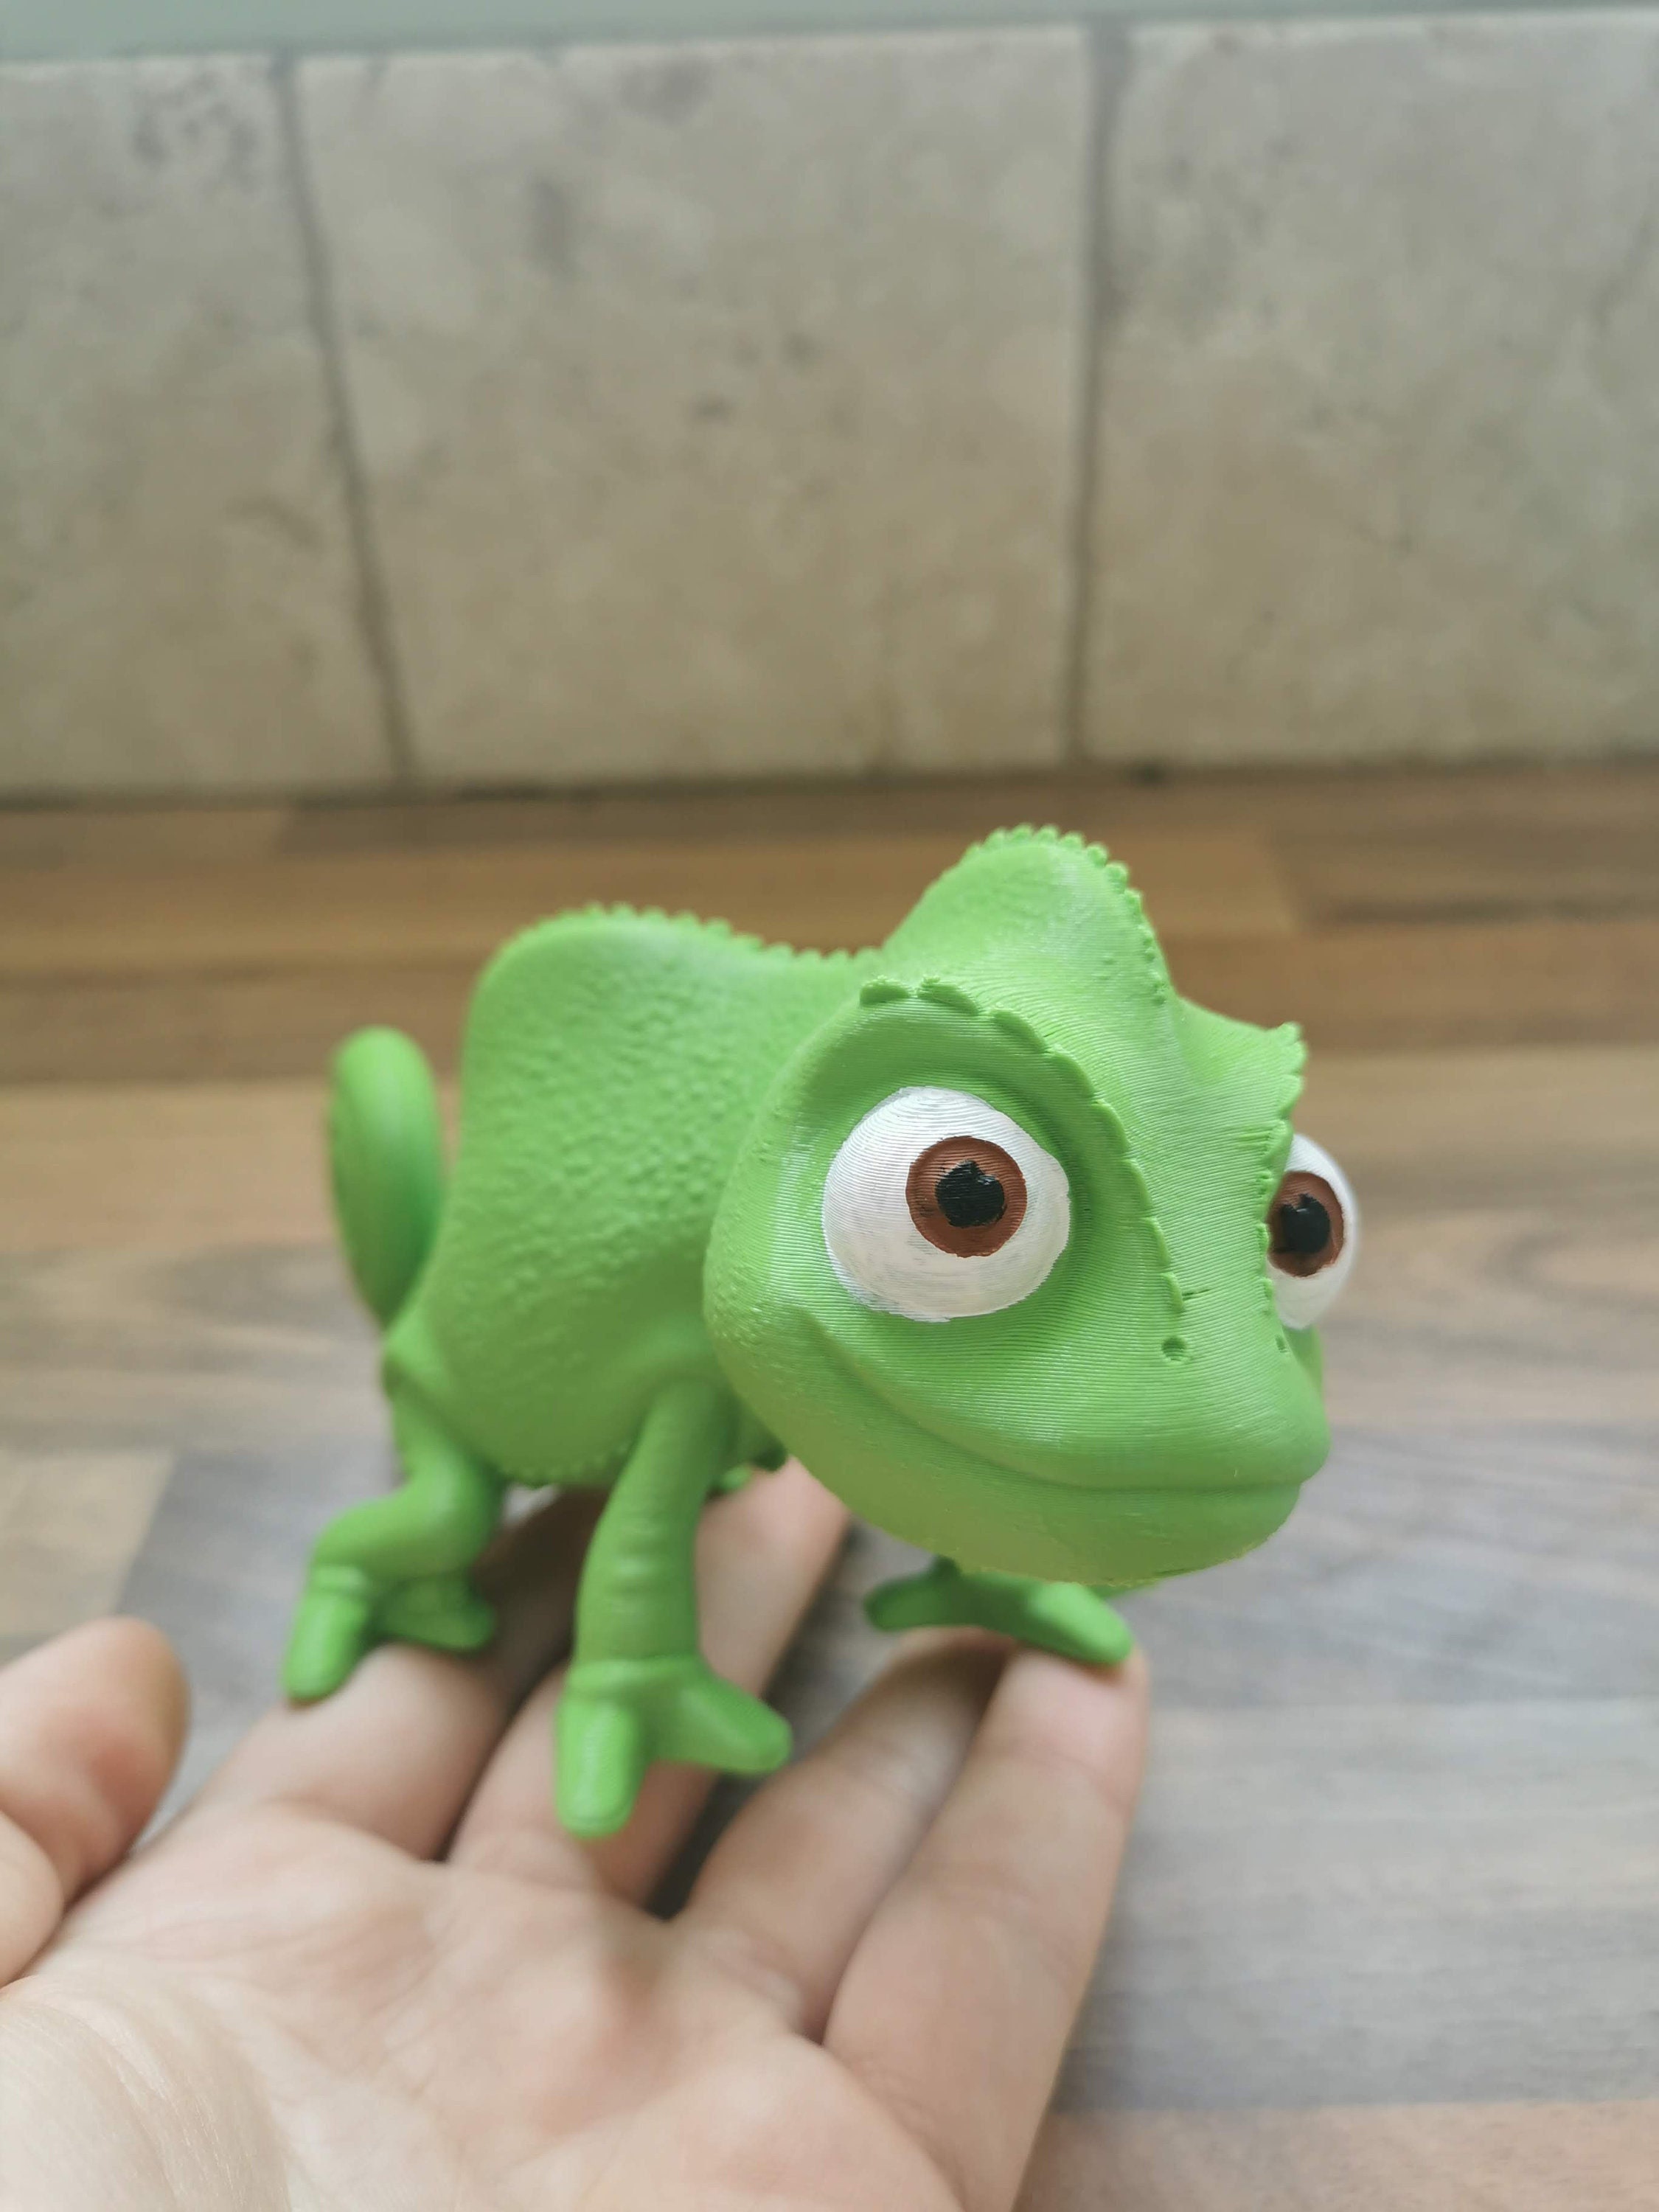 Disney Tangled Rapunzel Pascal the Chameleon Action Figure Toys Collection  Room Cake Decoration Cute Tiny Gift